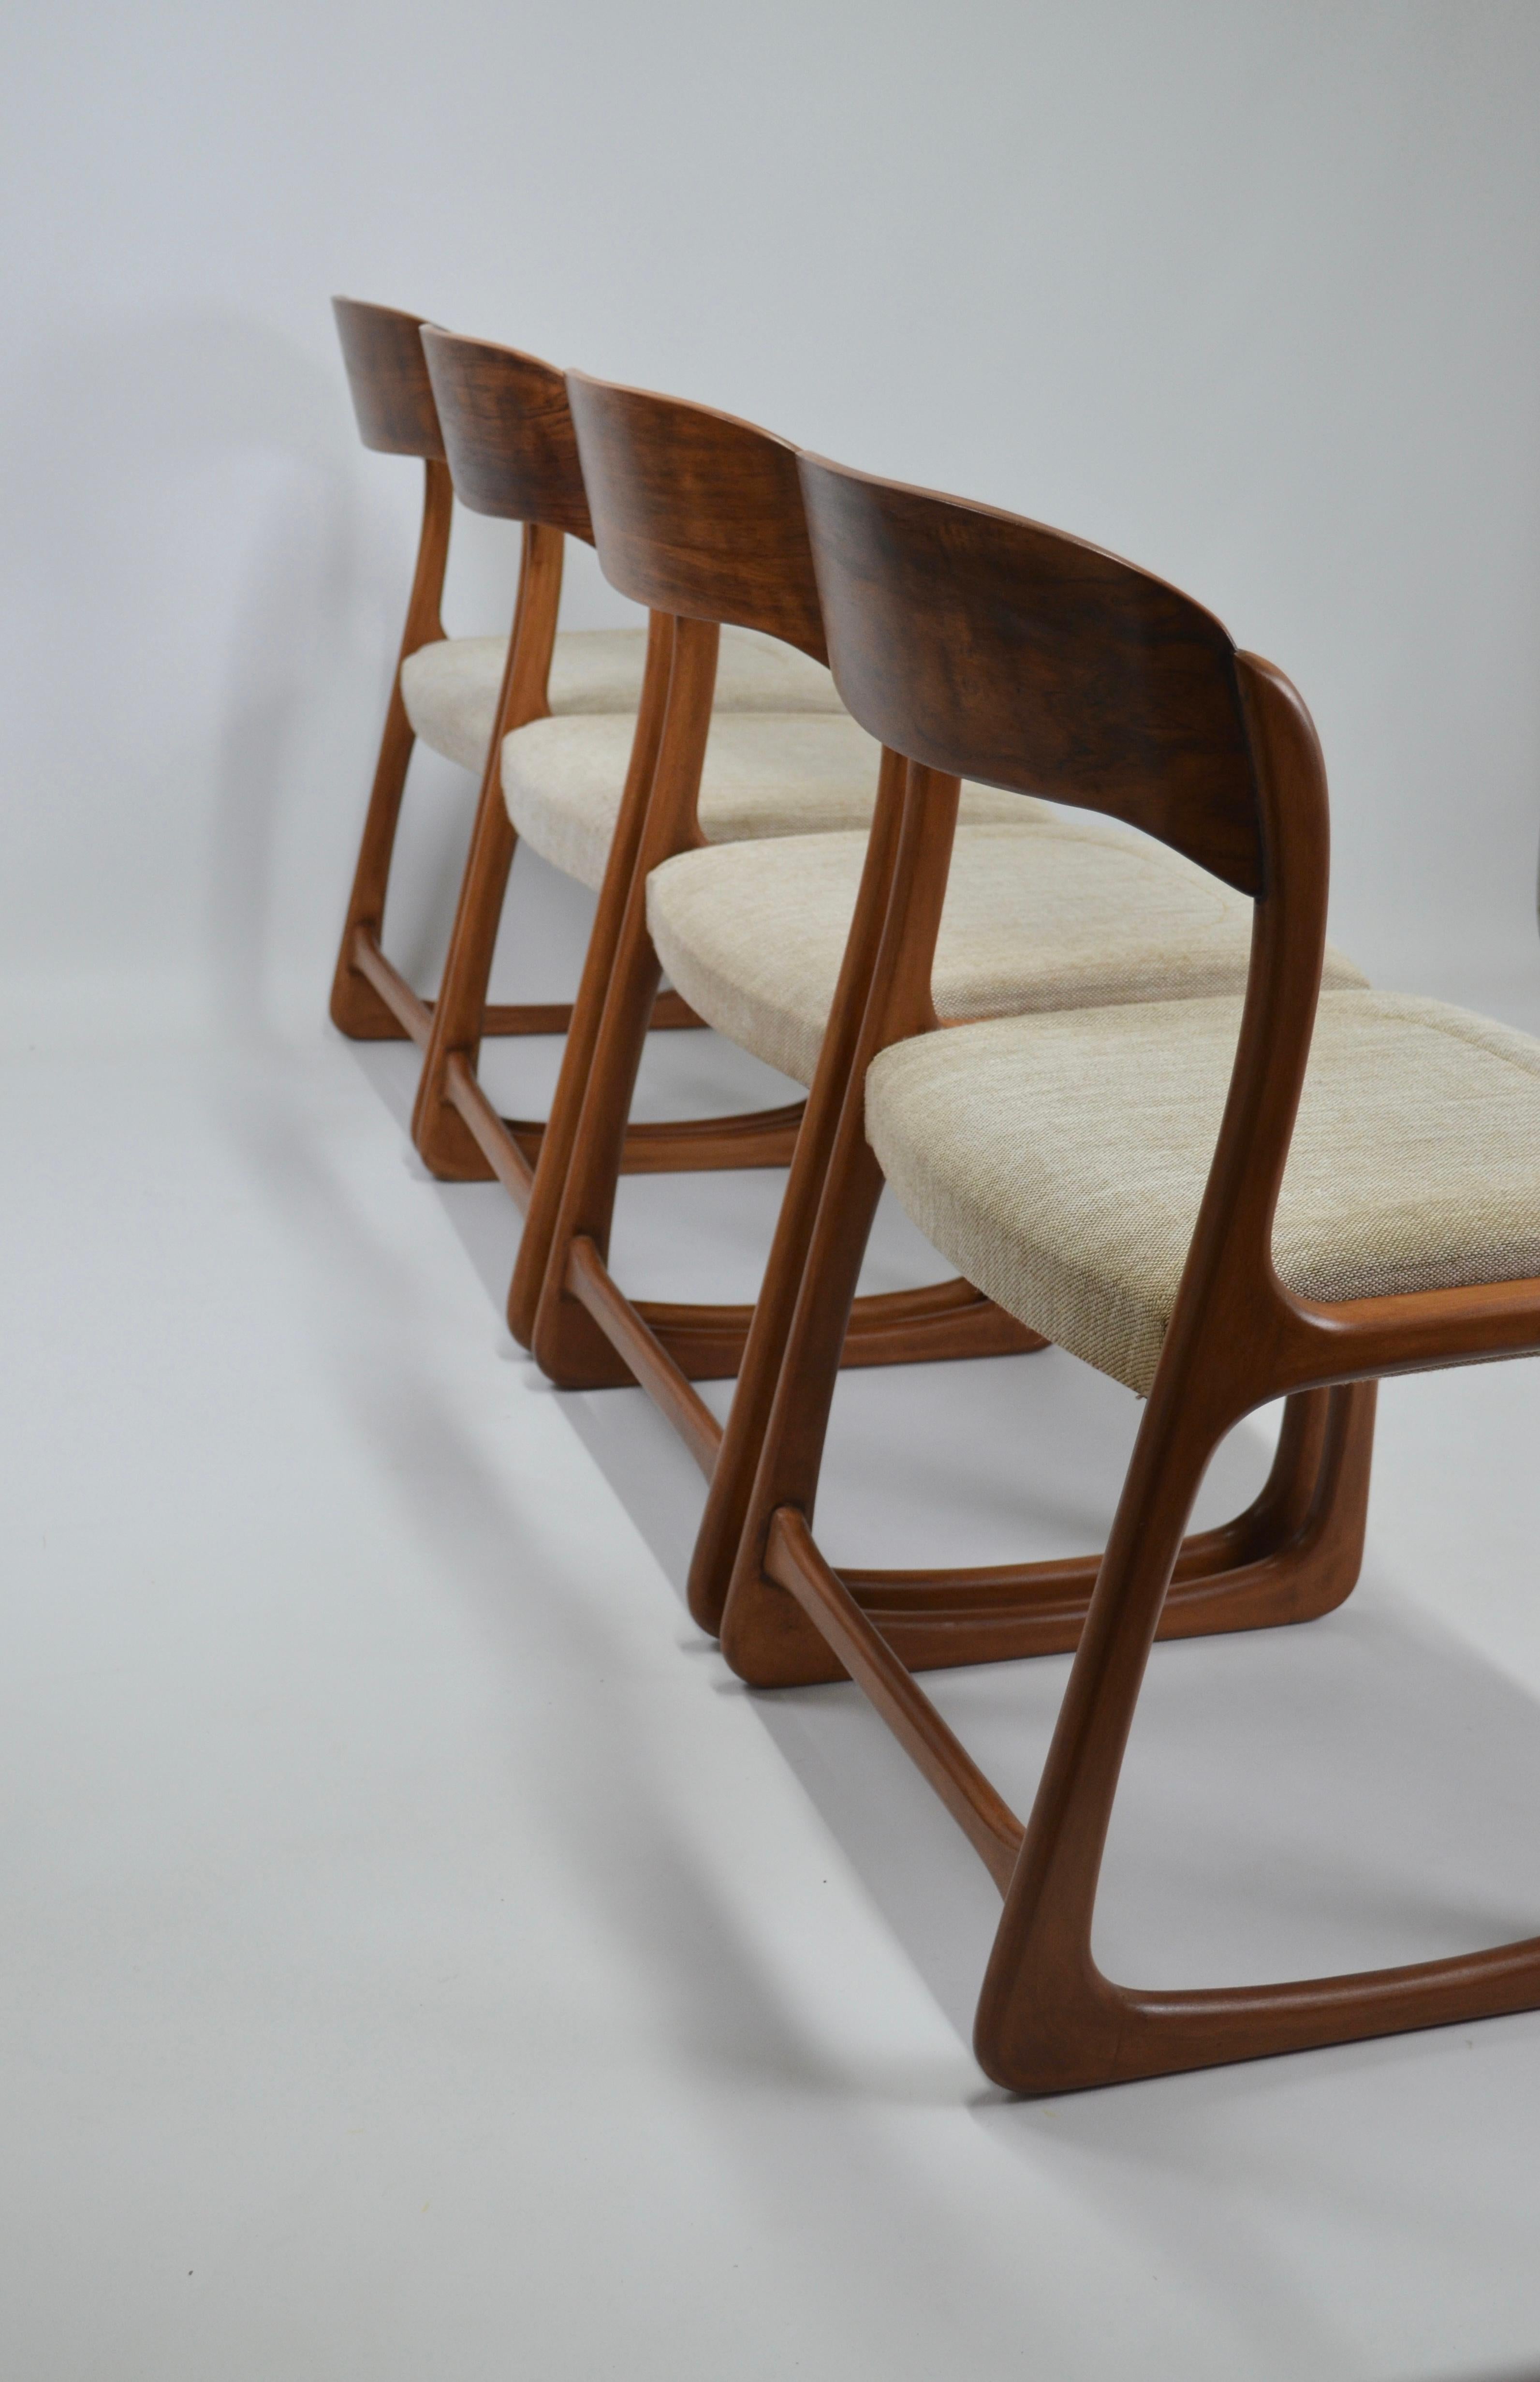 Mid-20th Century Vintage French Traineau or Sleigh Dining Chairs, Baumann, France, 60s For Sale